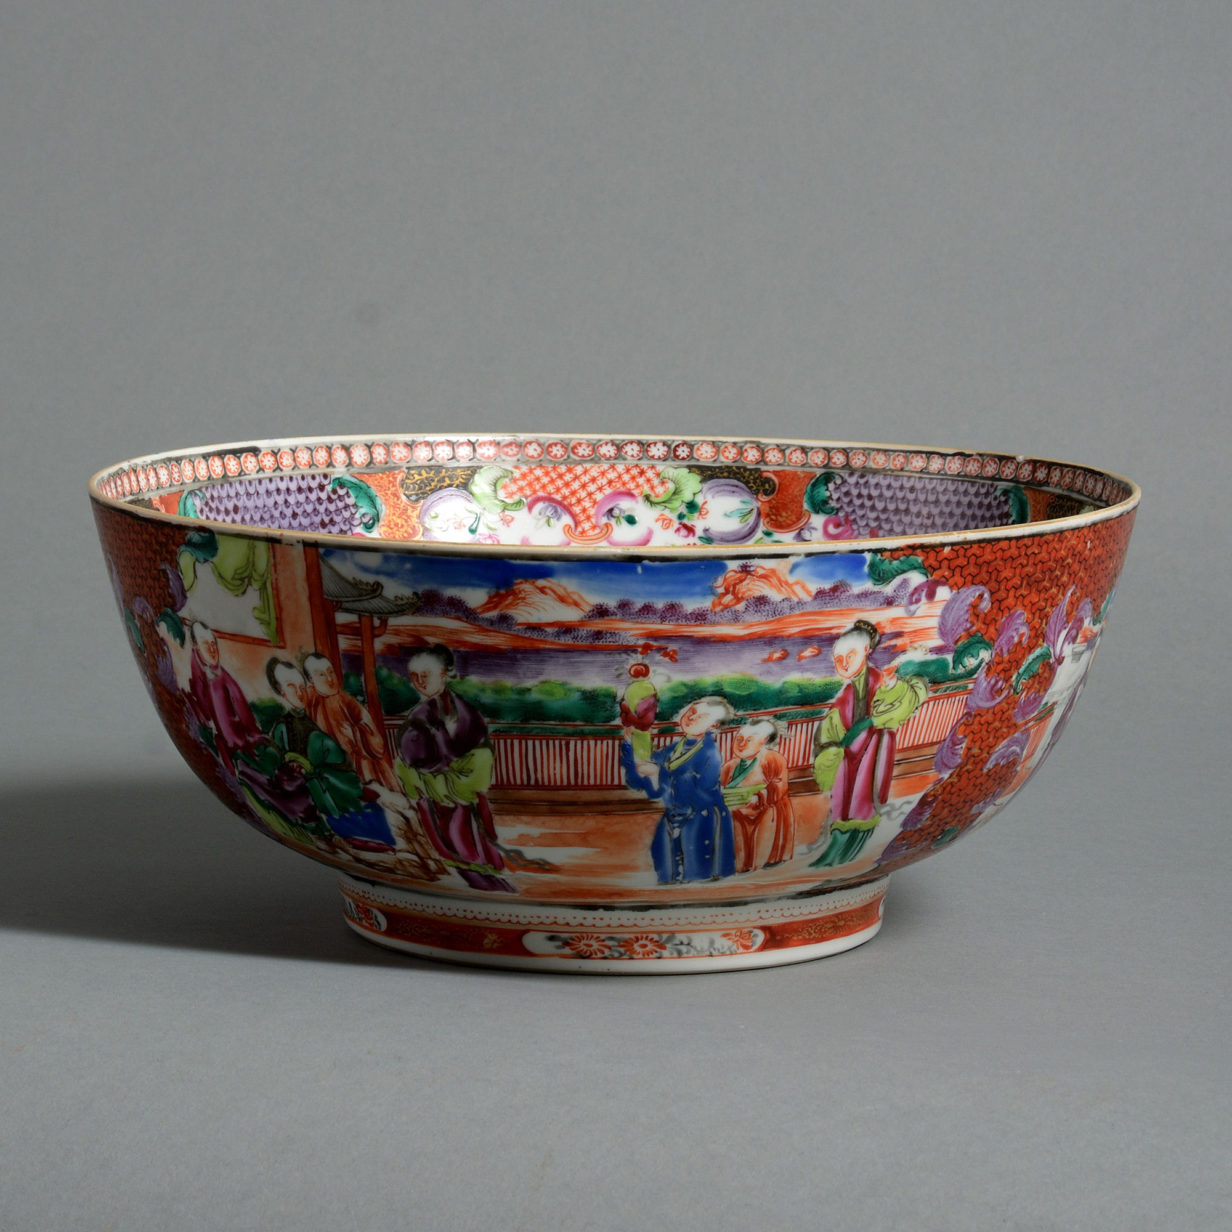 A late 18th century famille rose porcelain punch bowl